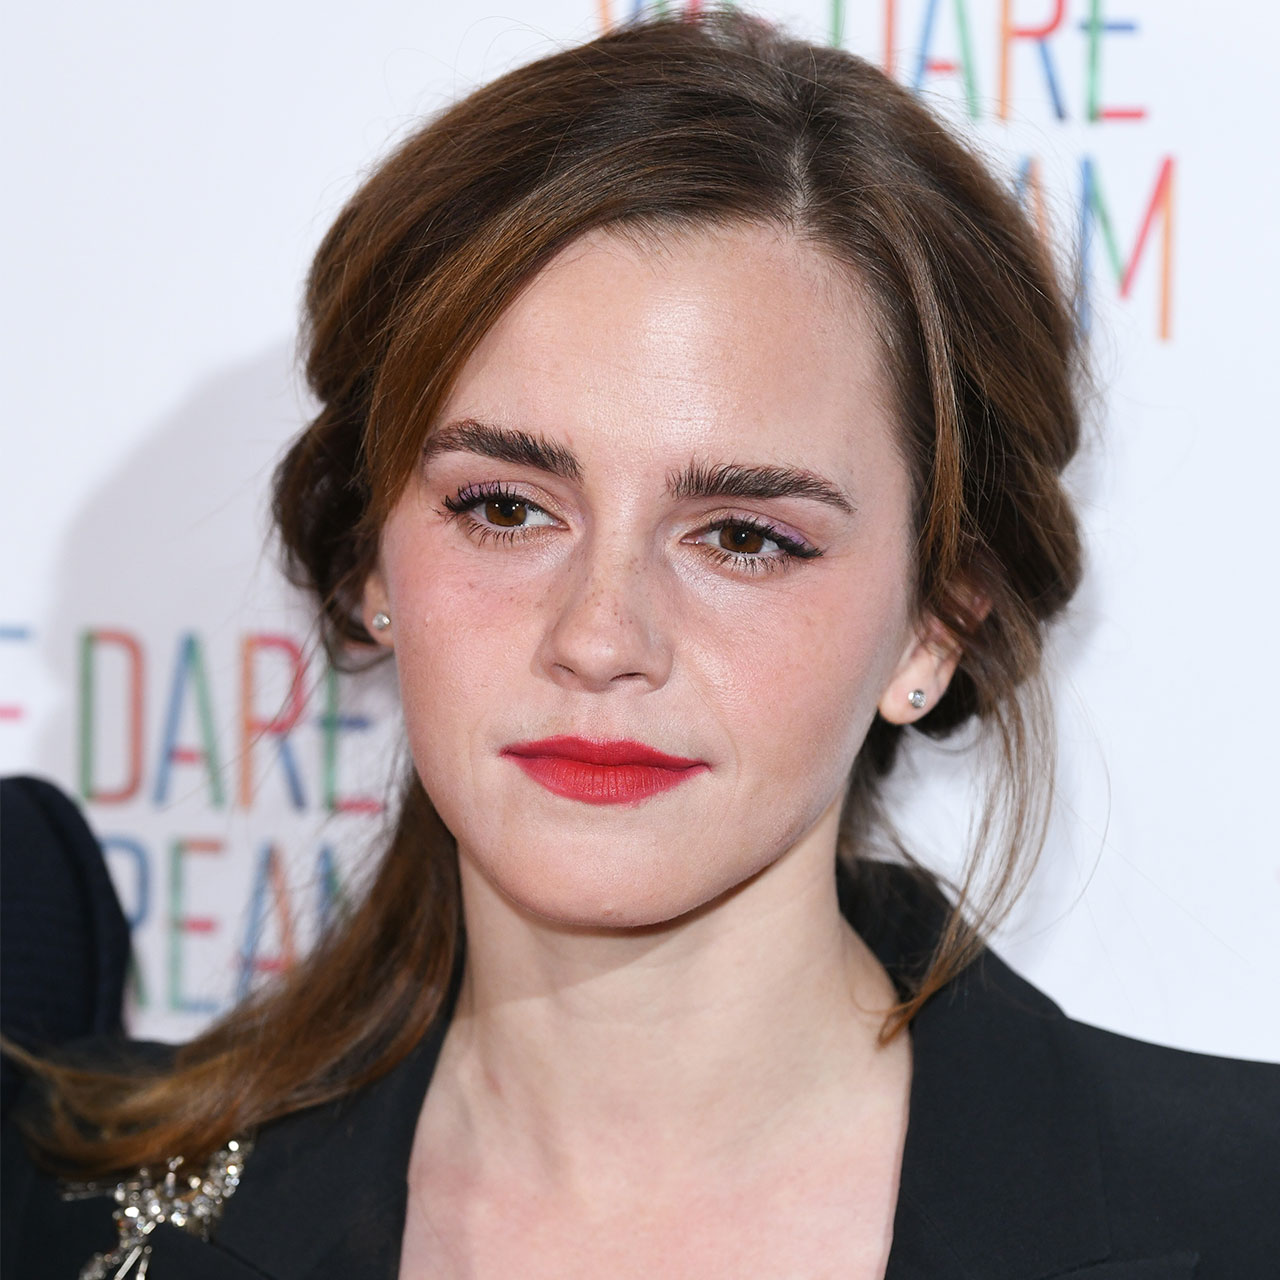 Harry Potter' Fans Say Emma Watson Looks Gorgeous in a Sheer